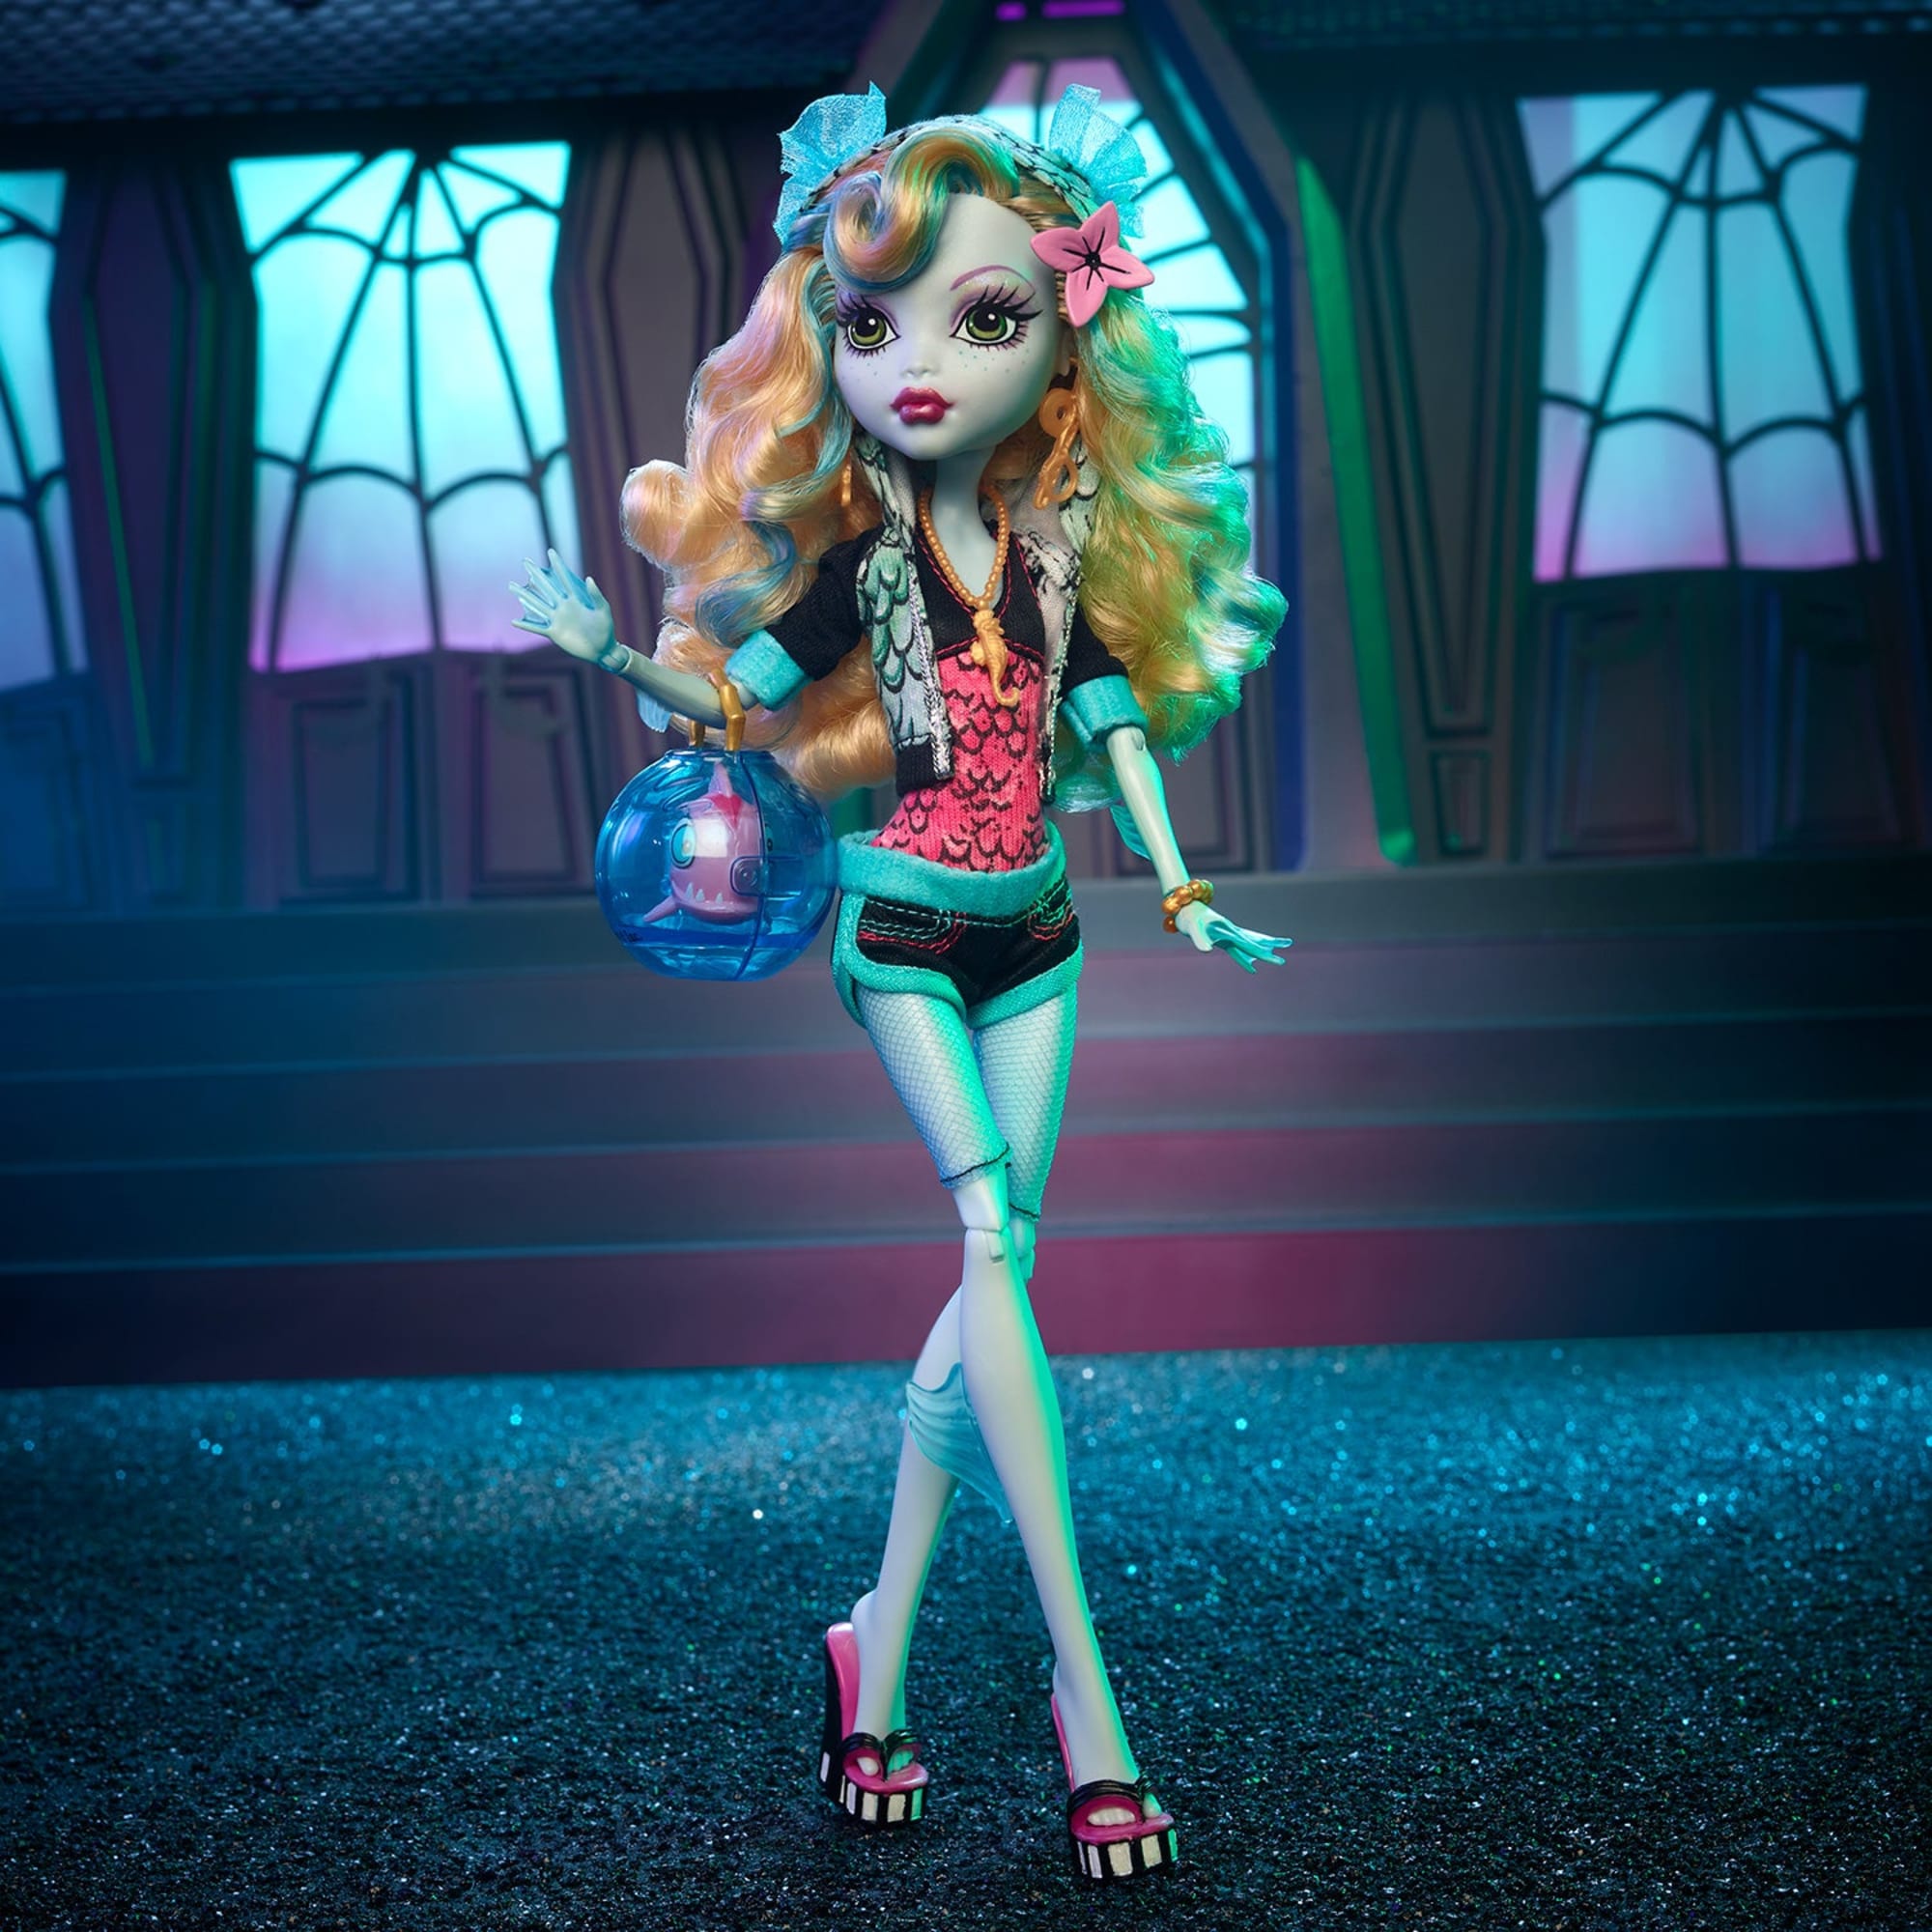 Monster High Lagoona Blue Doll [with Neptuna]